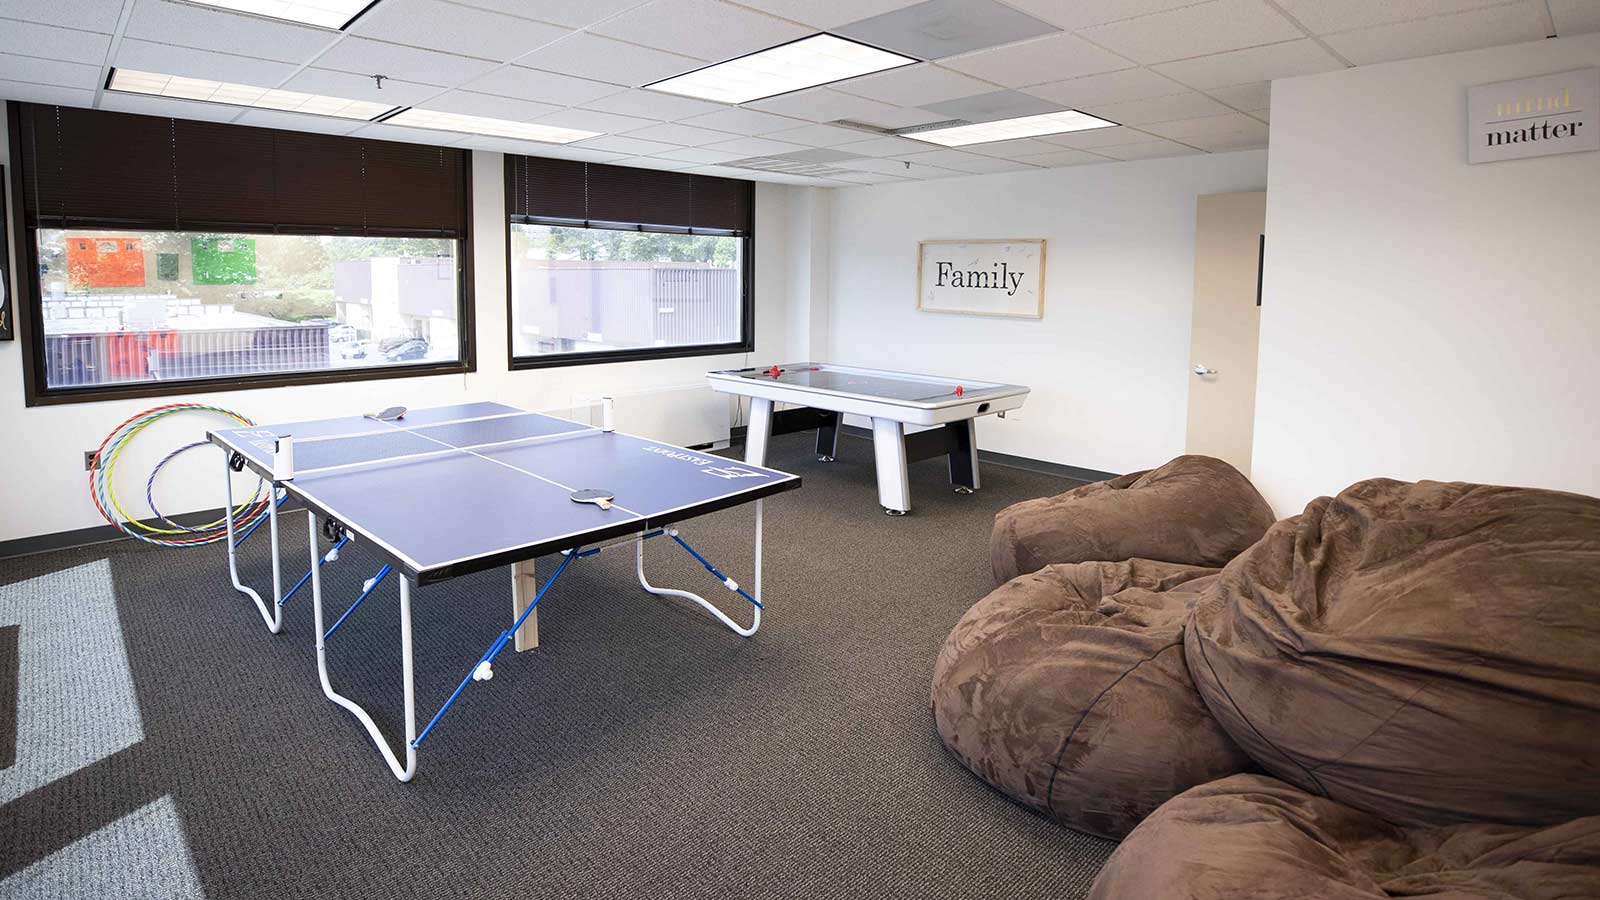 A recreational area with a ping pong table, air hockey table, and oversized beanbag chairs.